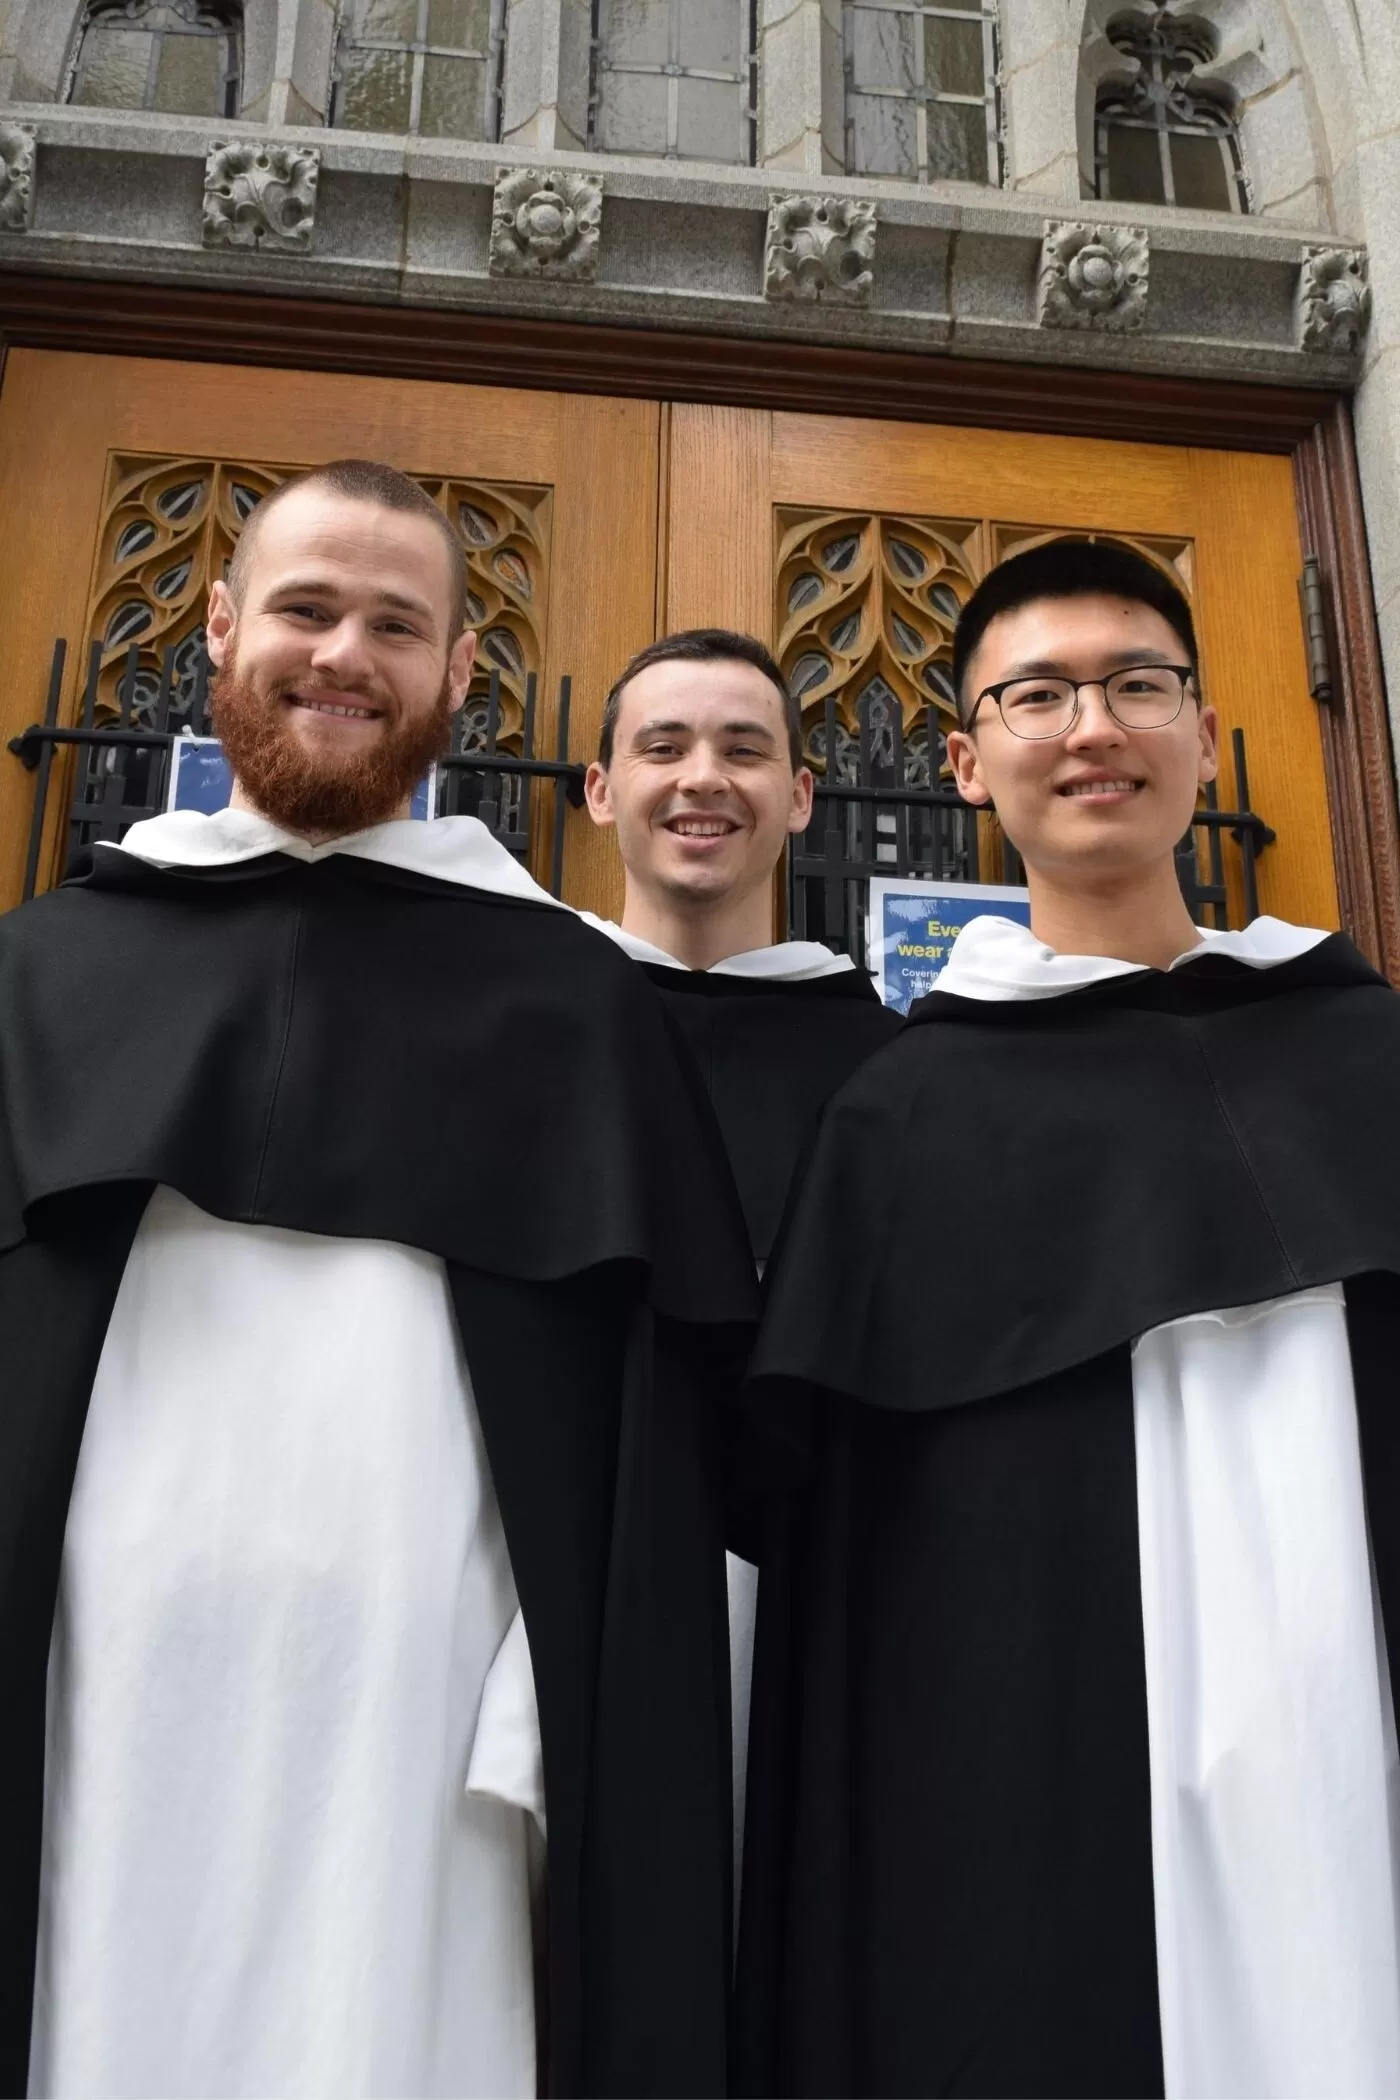 Three More Friars to Make First Profession